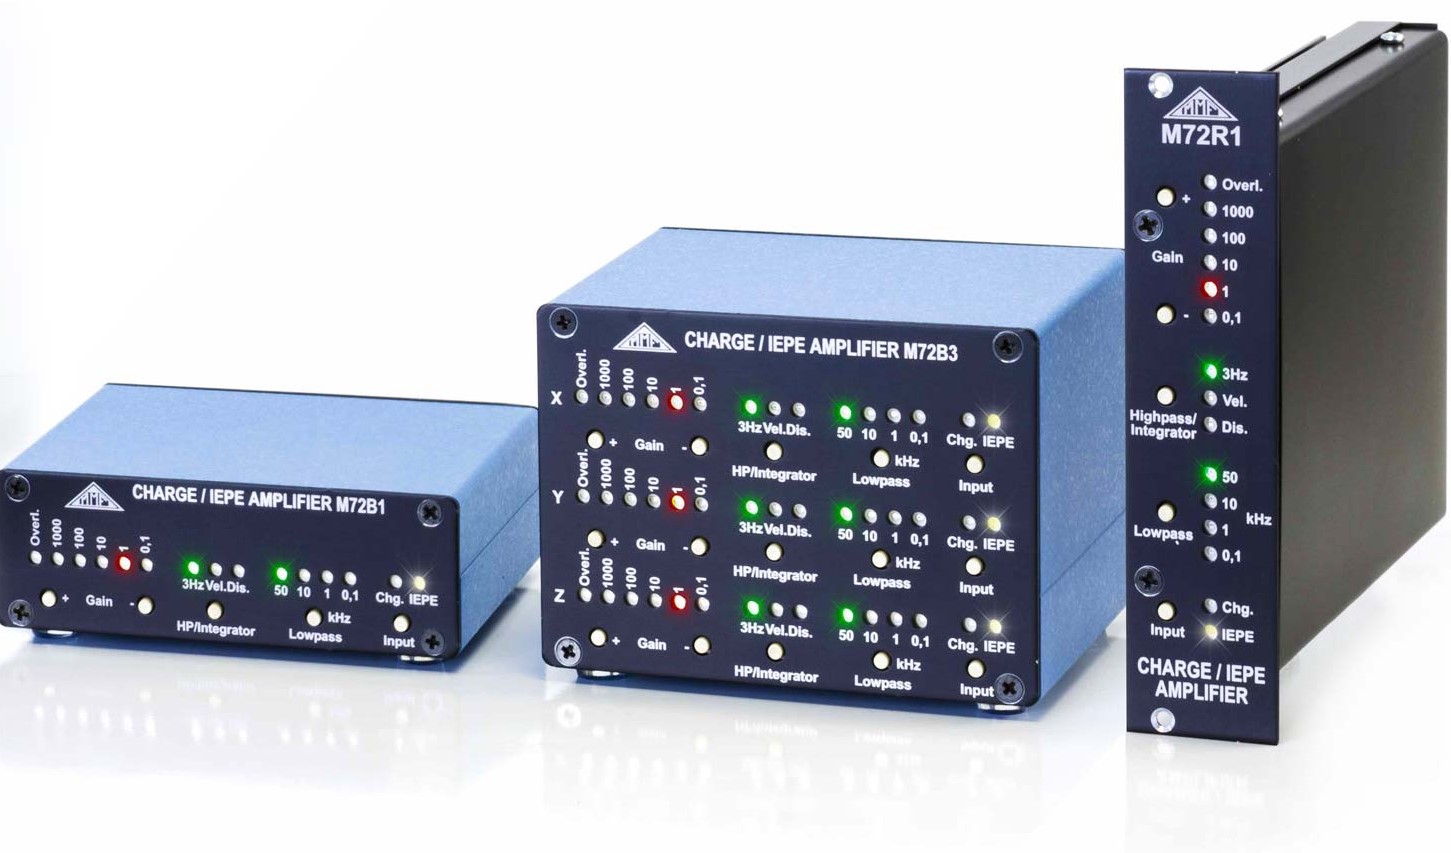 M72B, 1 & 3 Chn Desktop / Rack Mount Amplifiers for IEPE and Charge Amplifiers